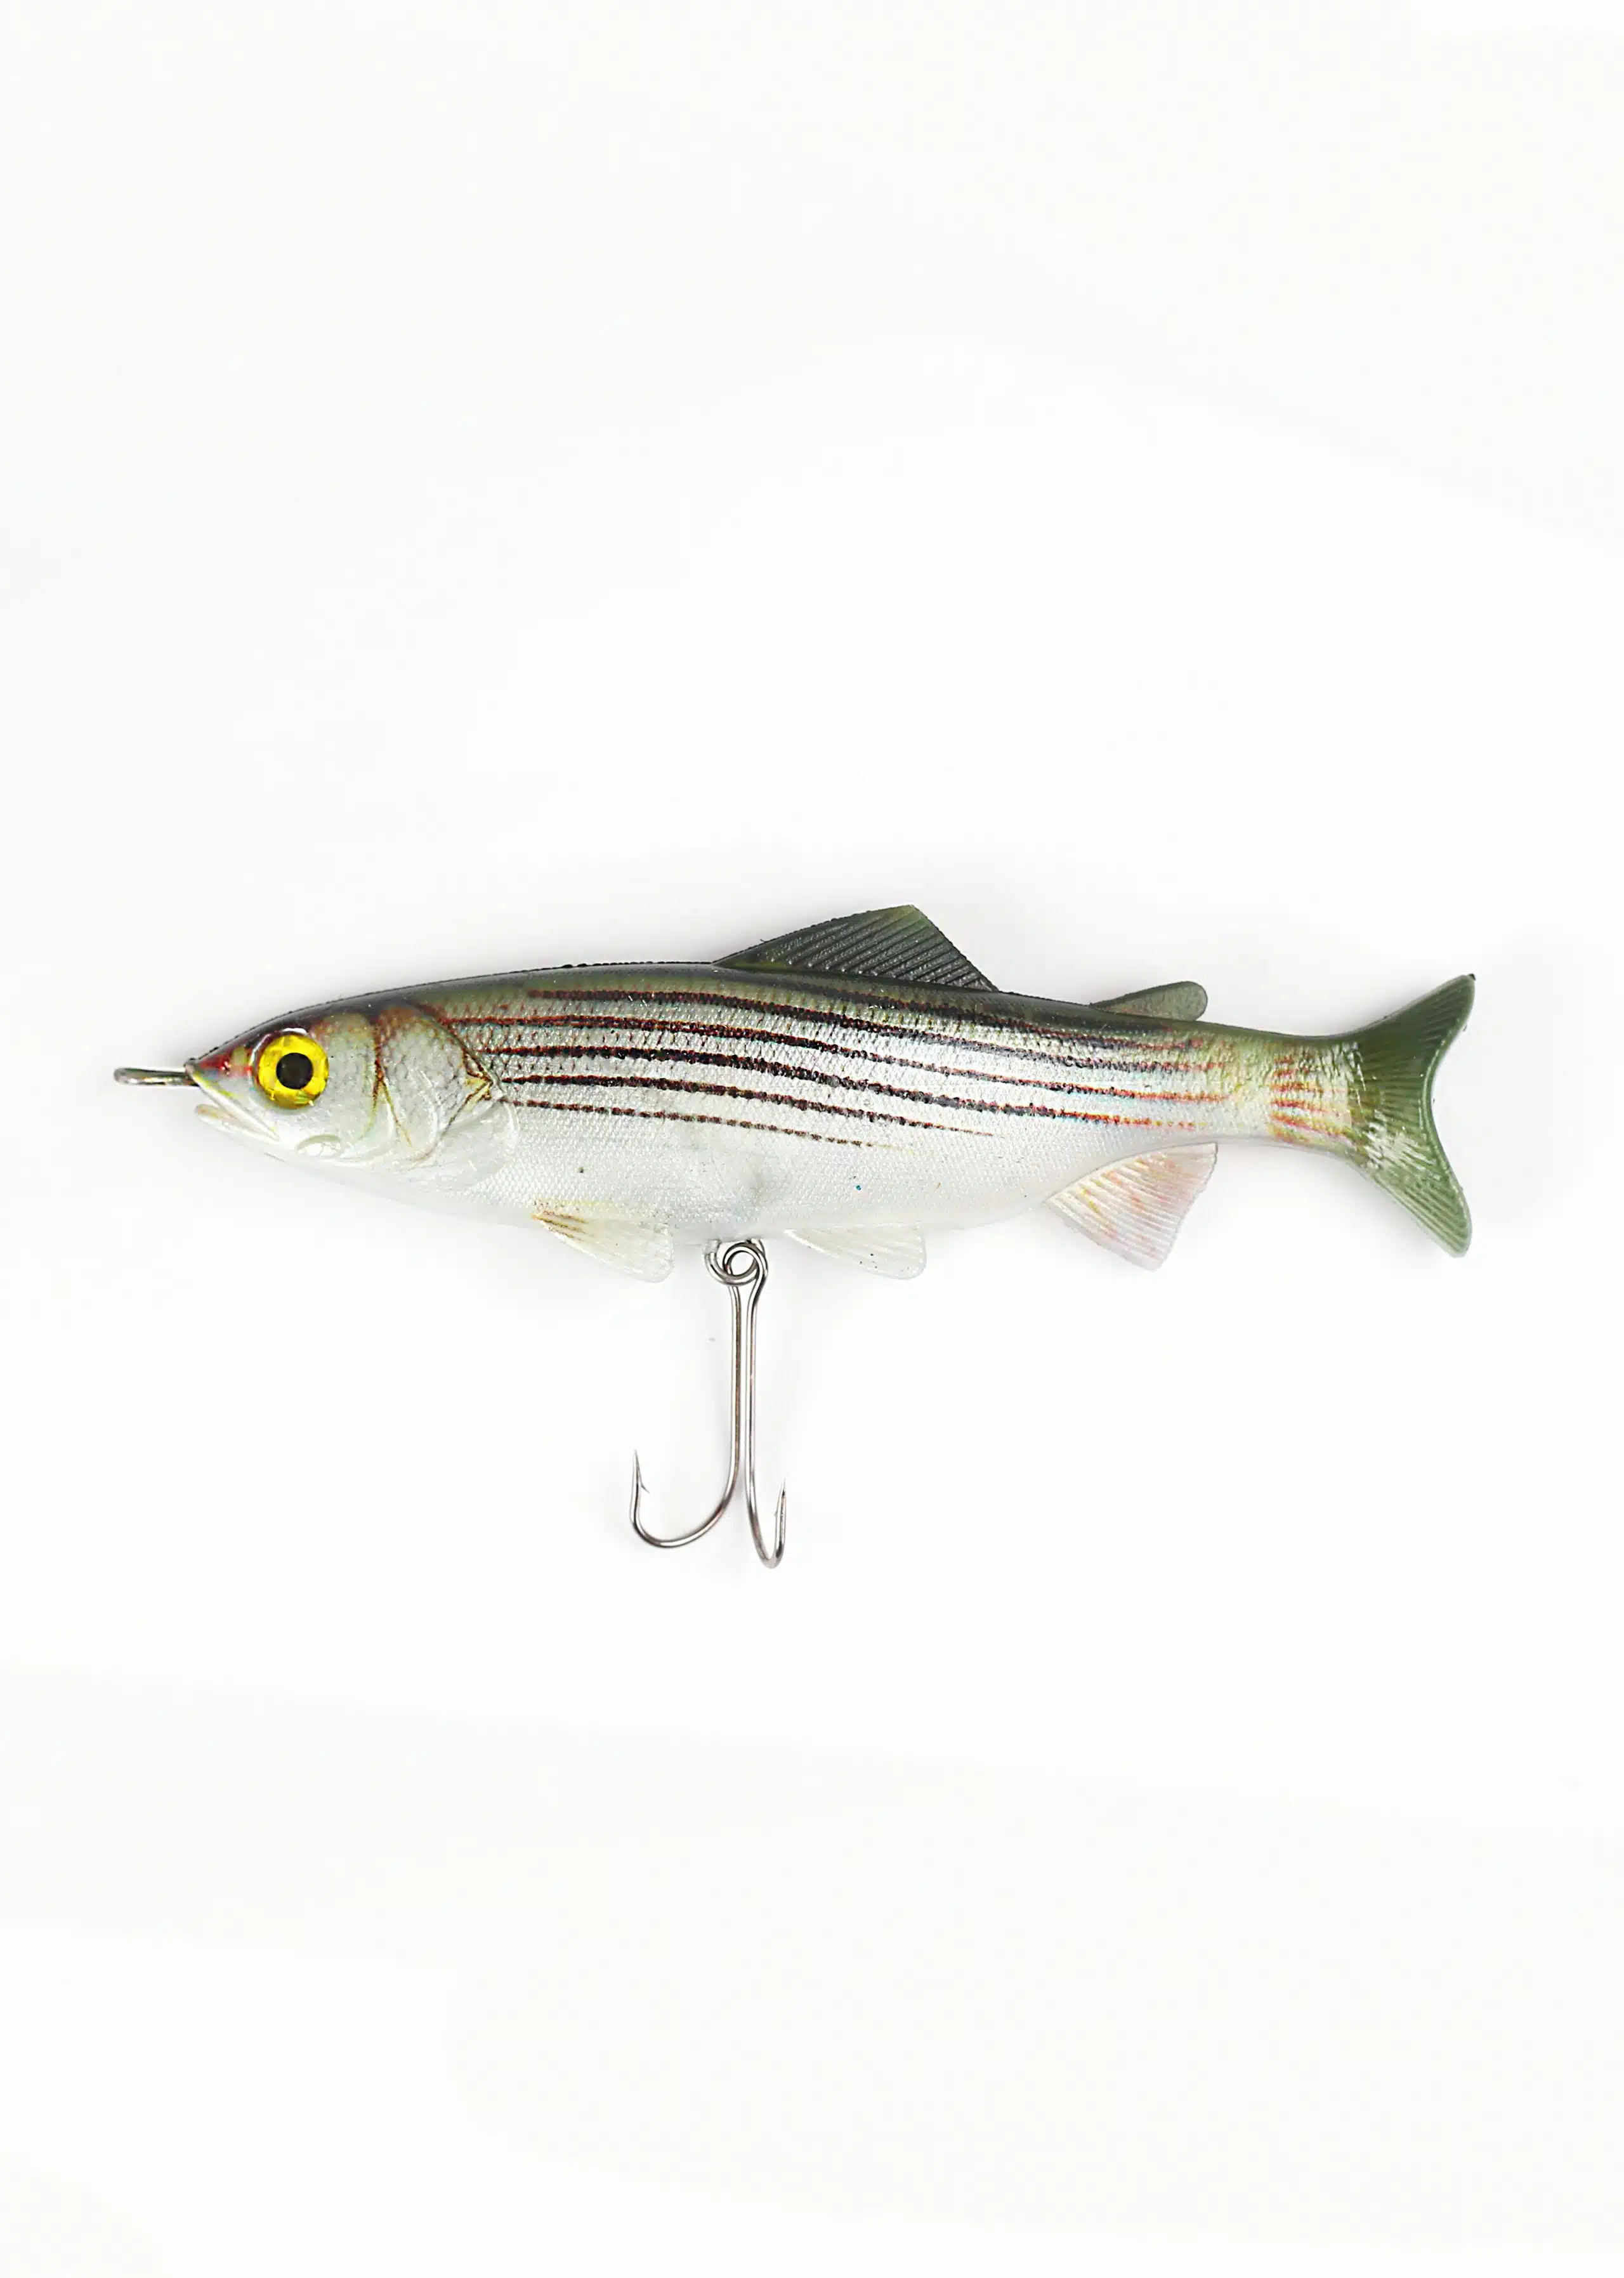 NEW PADDLETAIL LURE (with scales that make saltwater fish go crazy)! 